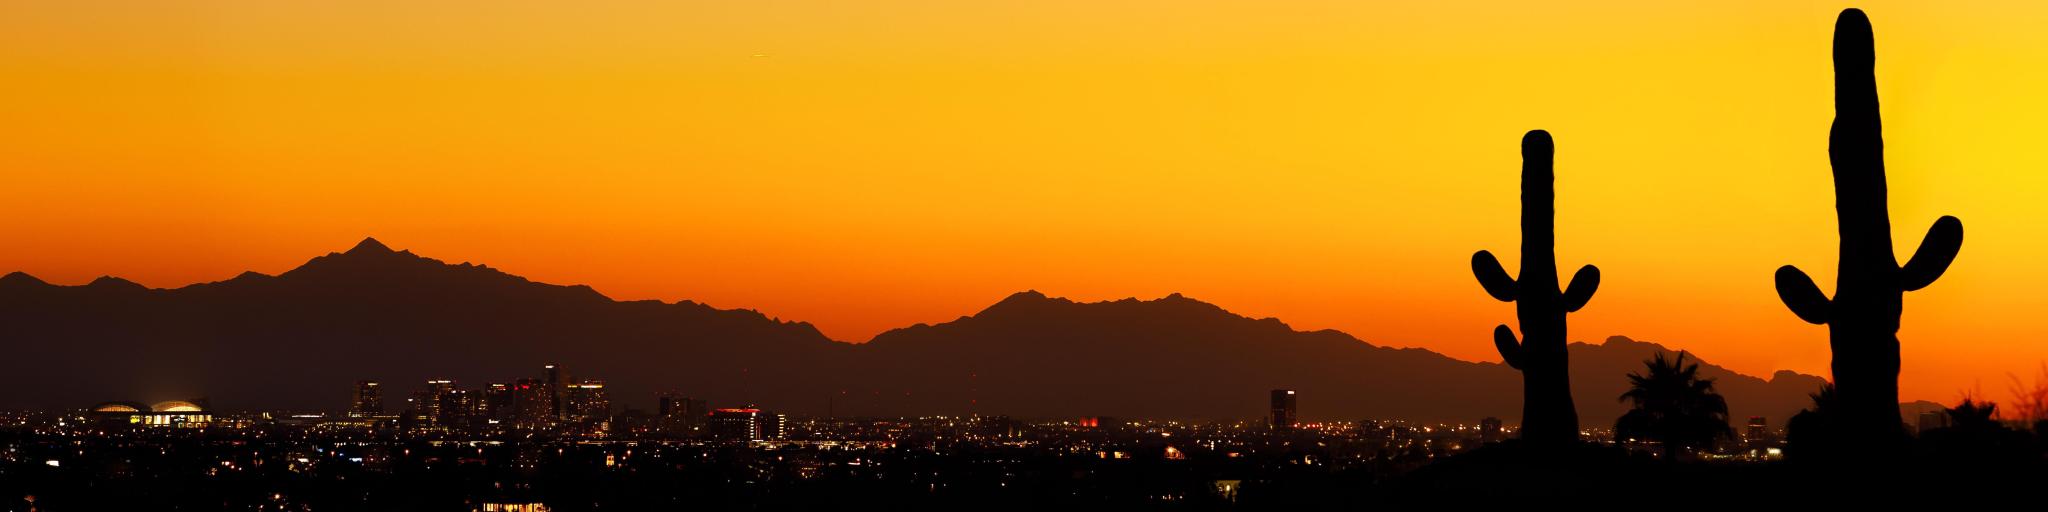 Silhouette of mountains with vibrant orange sky and outline of buildings in shadow in the foreground